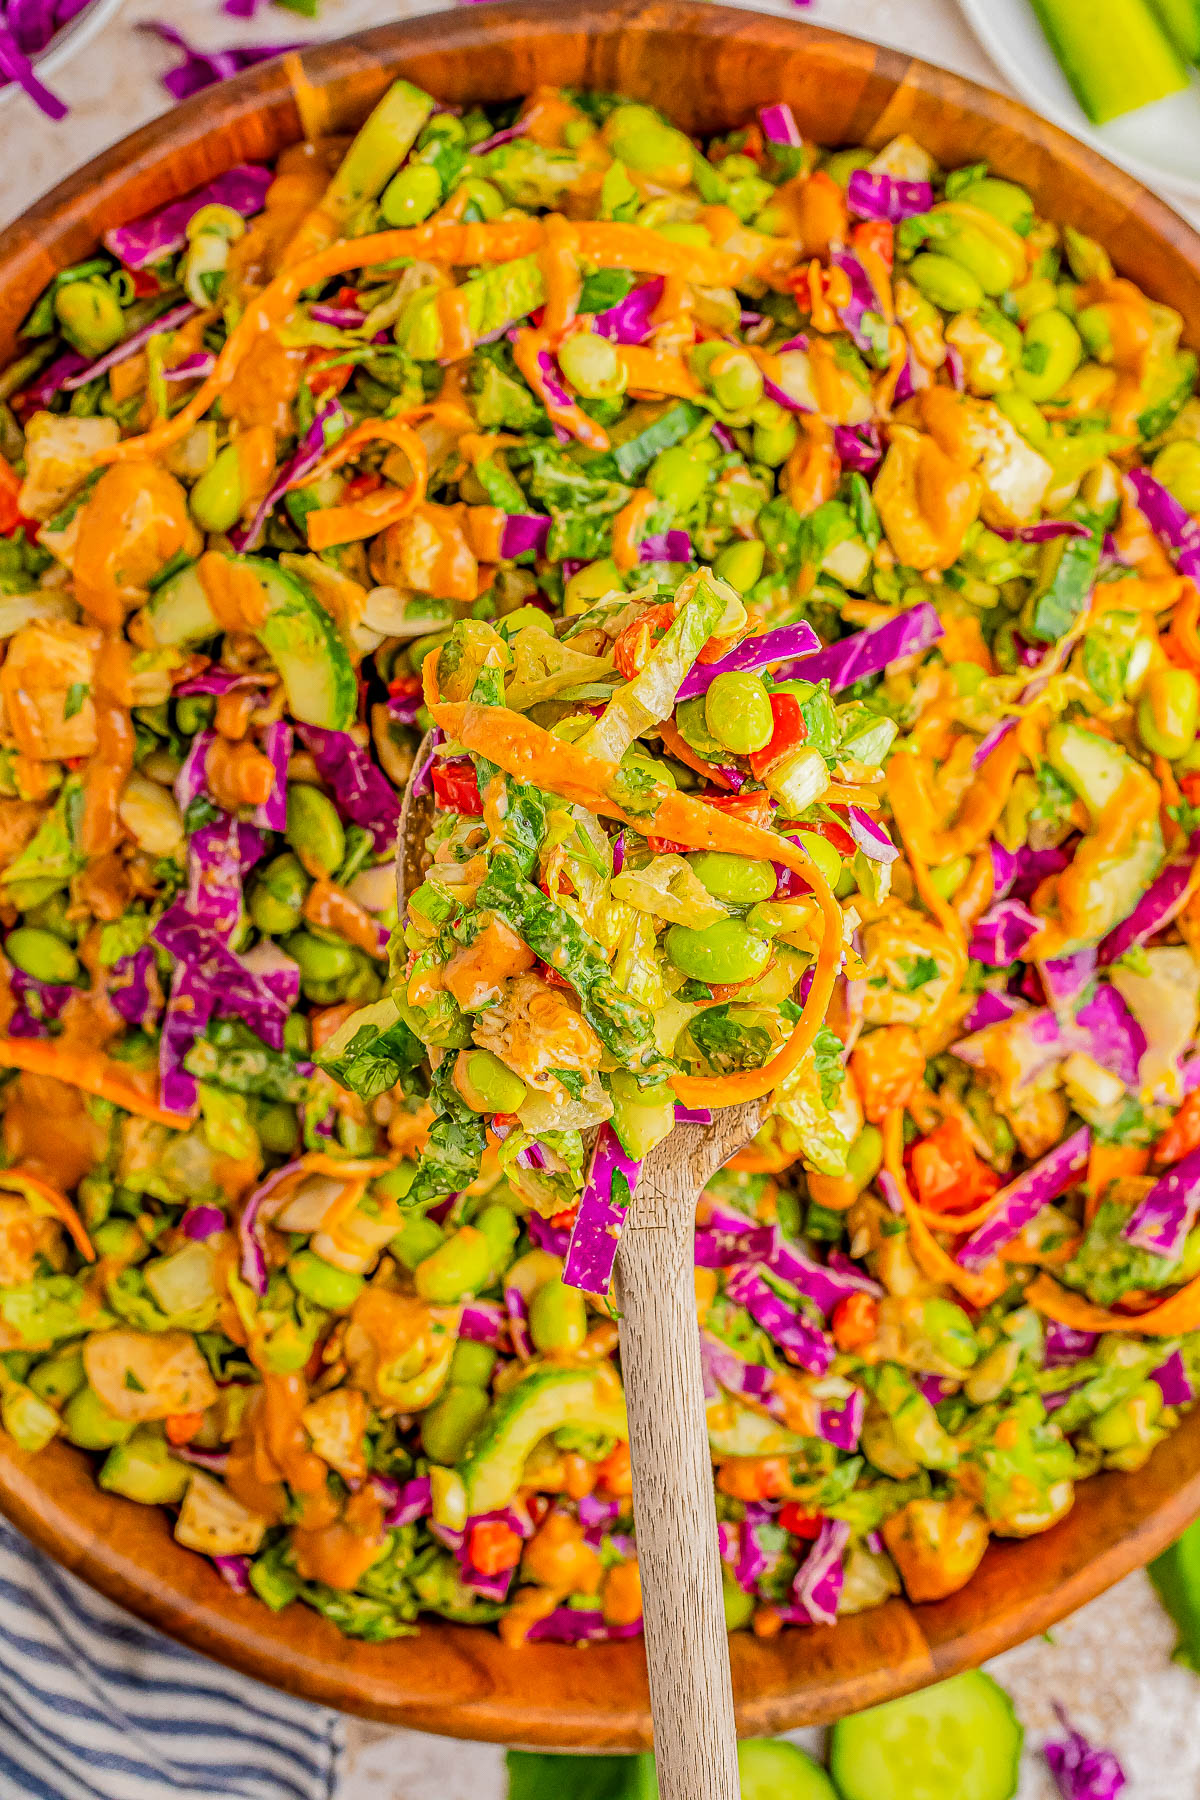 A wooden spoon holds a portion of colorful salad with ingredients like lettuce, cucumber, edamame, carrots, and purple cabbage, dressed in an orange-colored sauce, from a large wooden bowl.